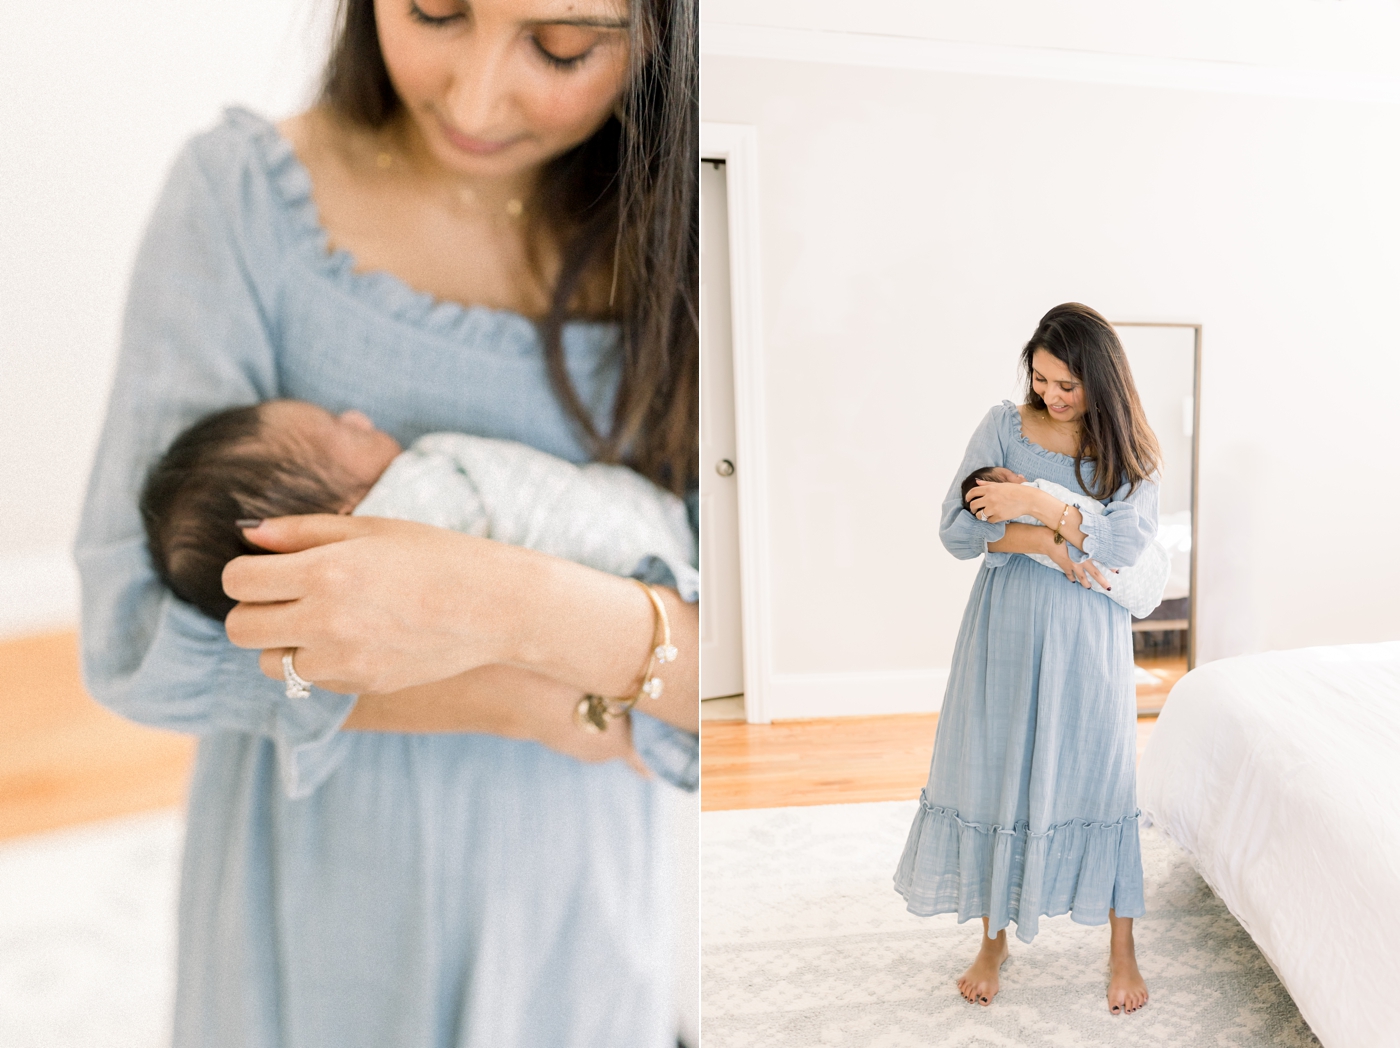 In-home lifestyle newborn session. Mom is wearing a blue dress and looking at her baby boy. Photo by Caitlyn Motycka Photography.